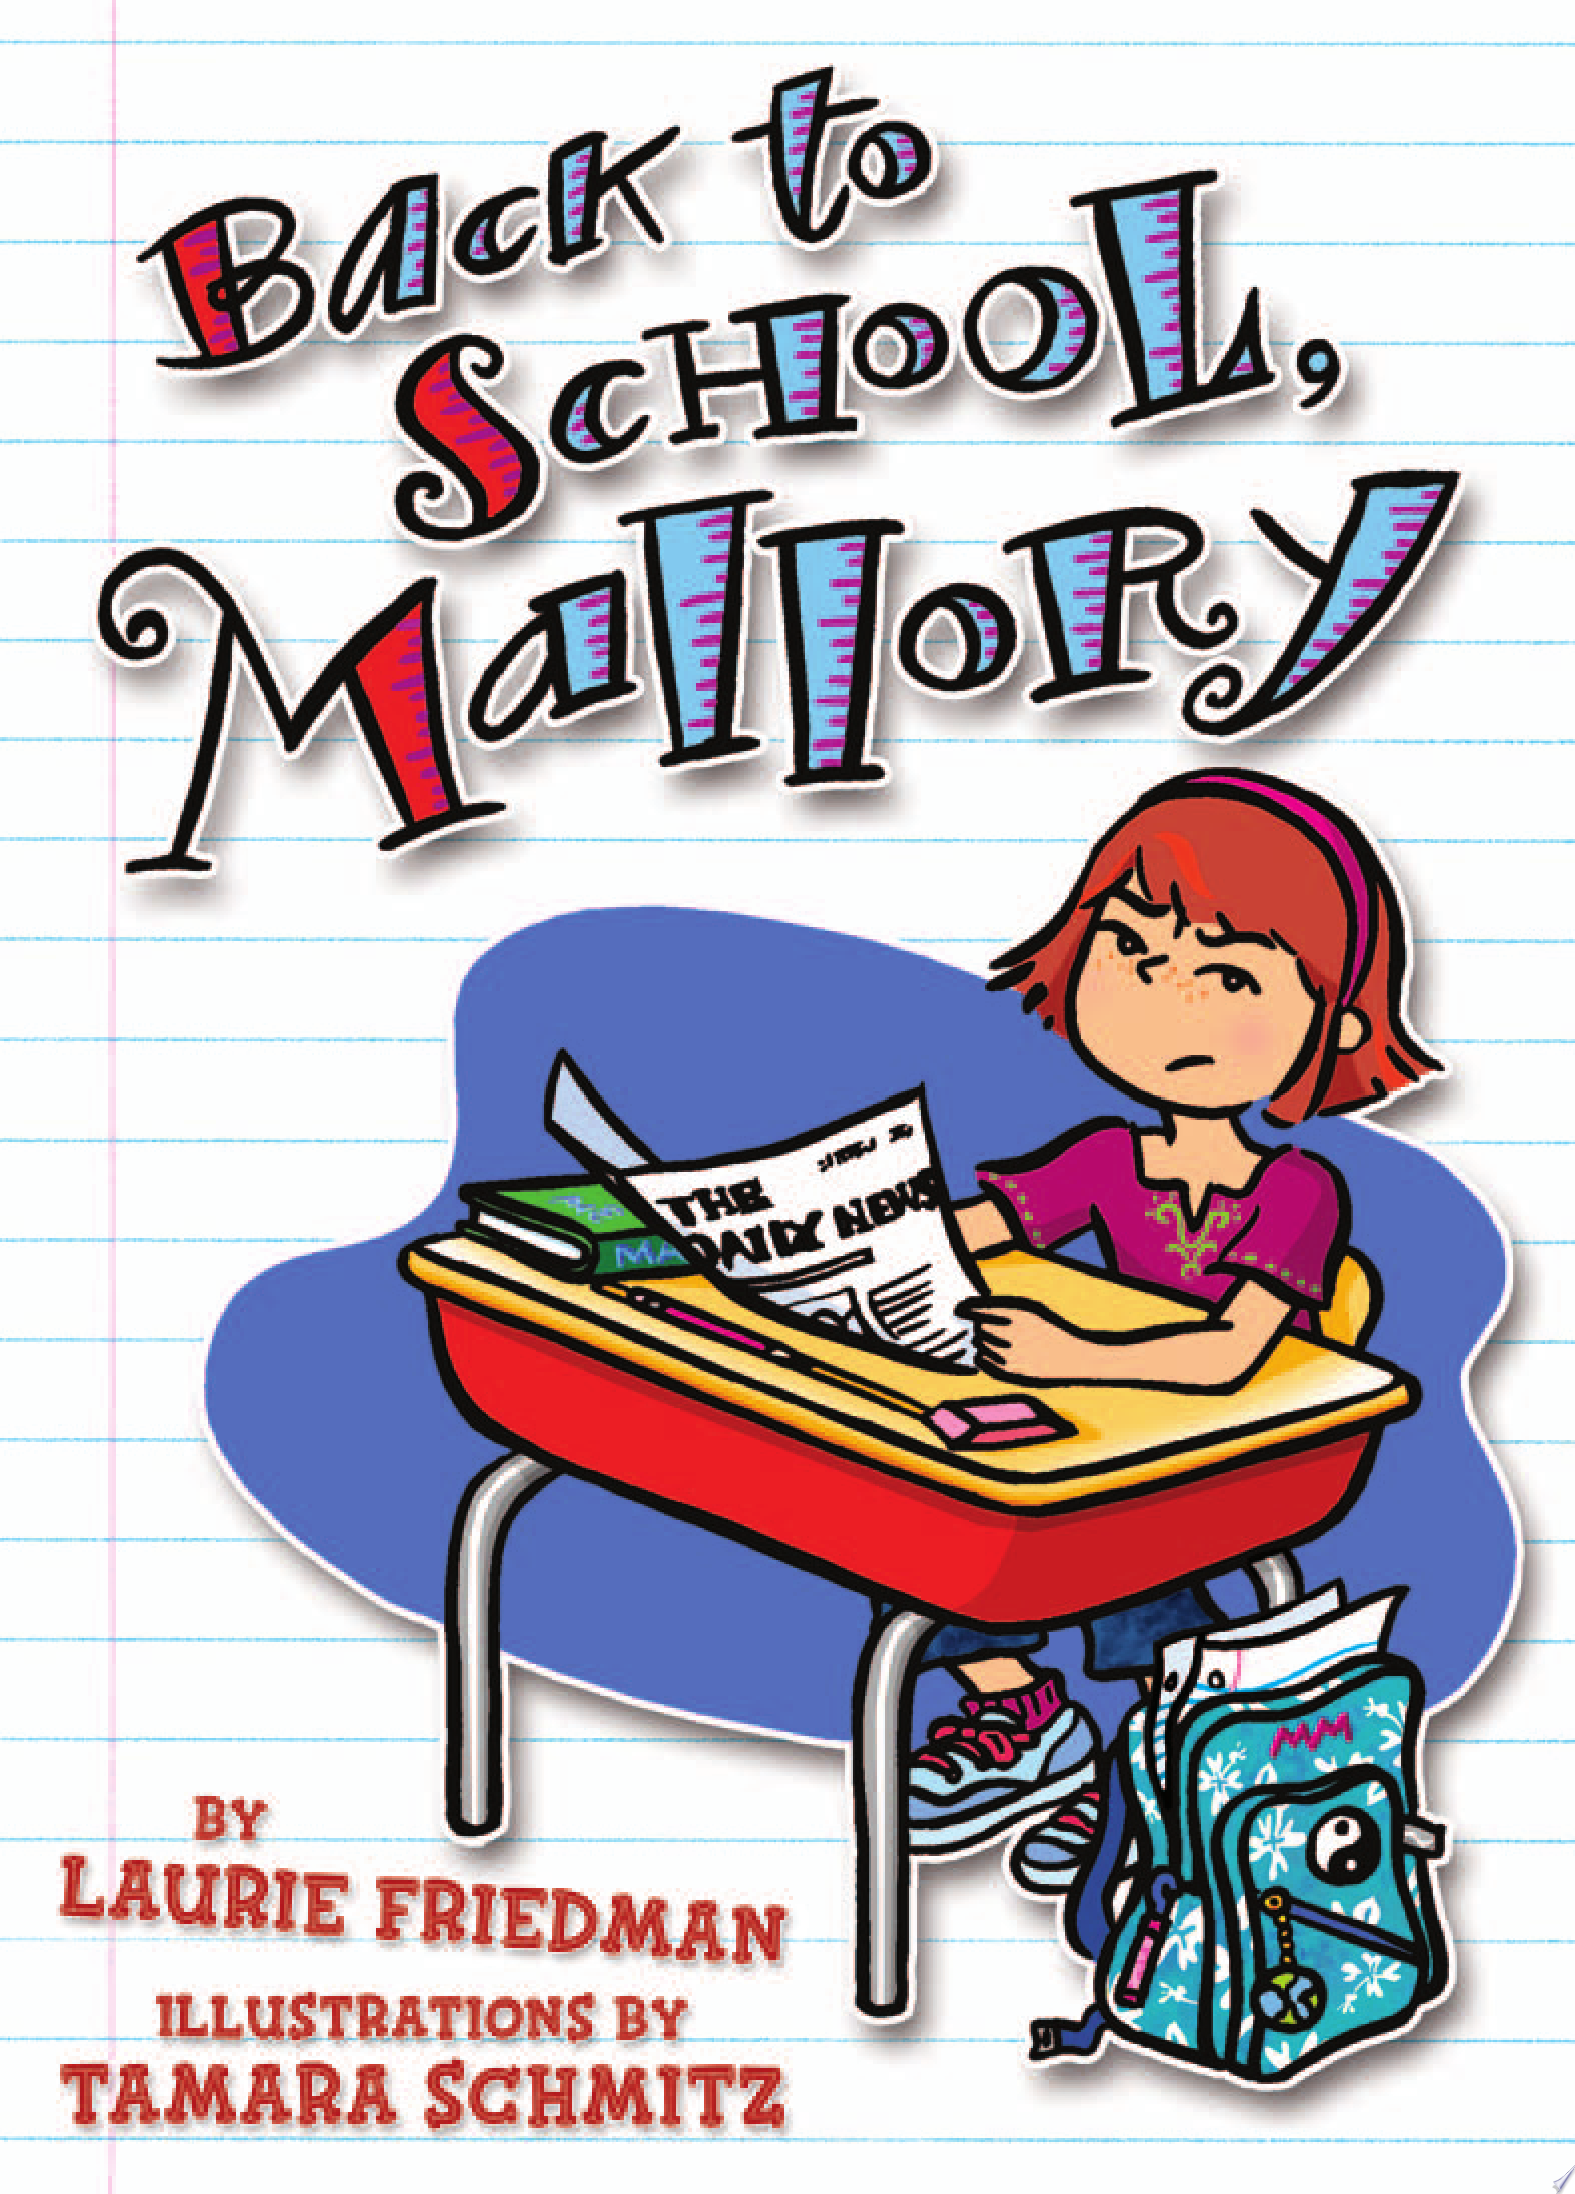 Image for "Back to School, Mallory"